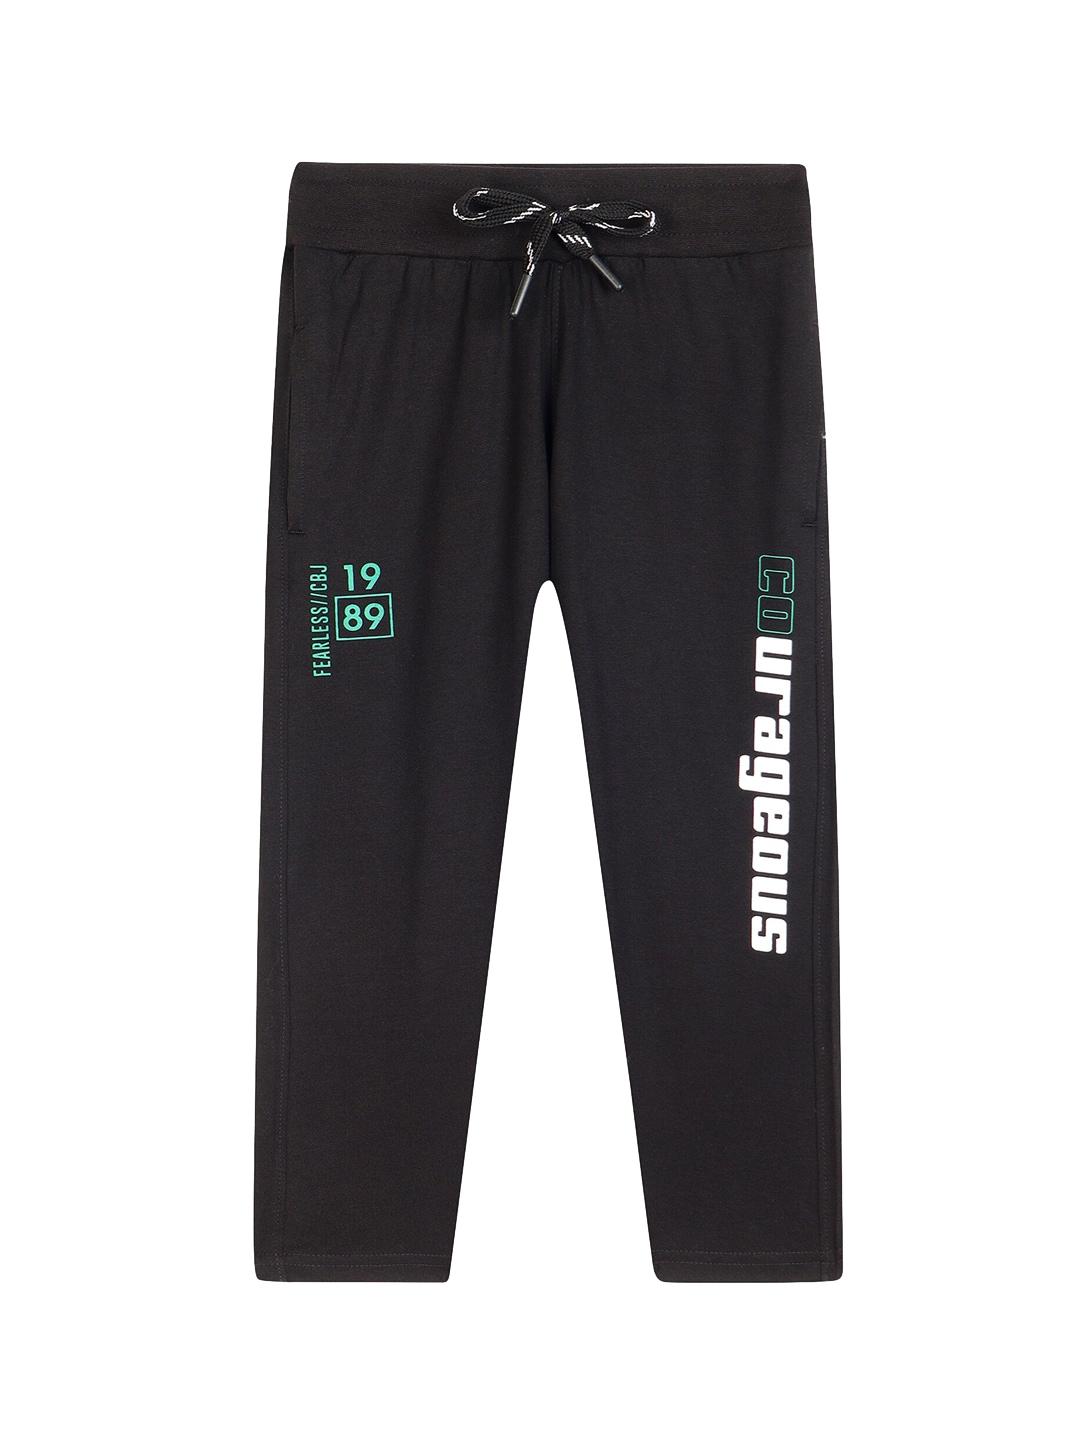 cantabil boys typography printed mid-rise track pants